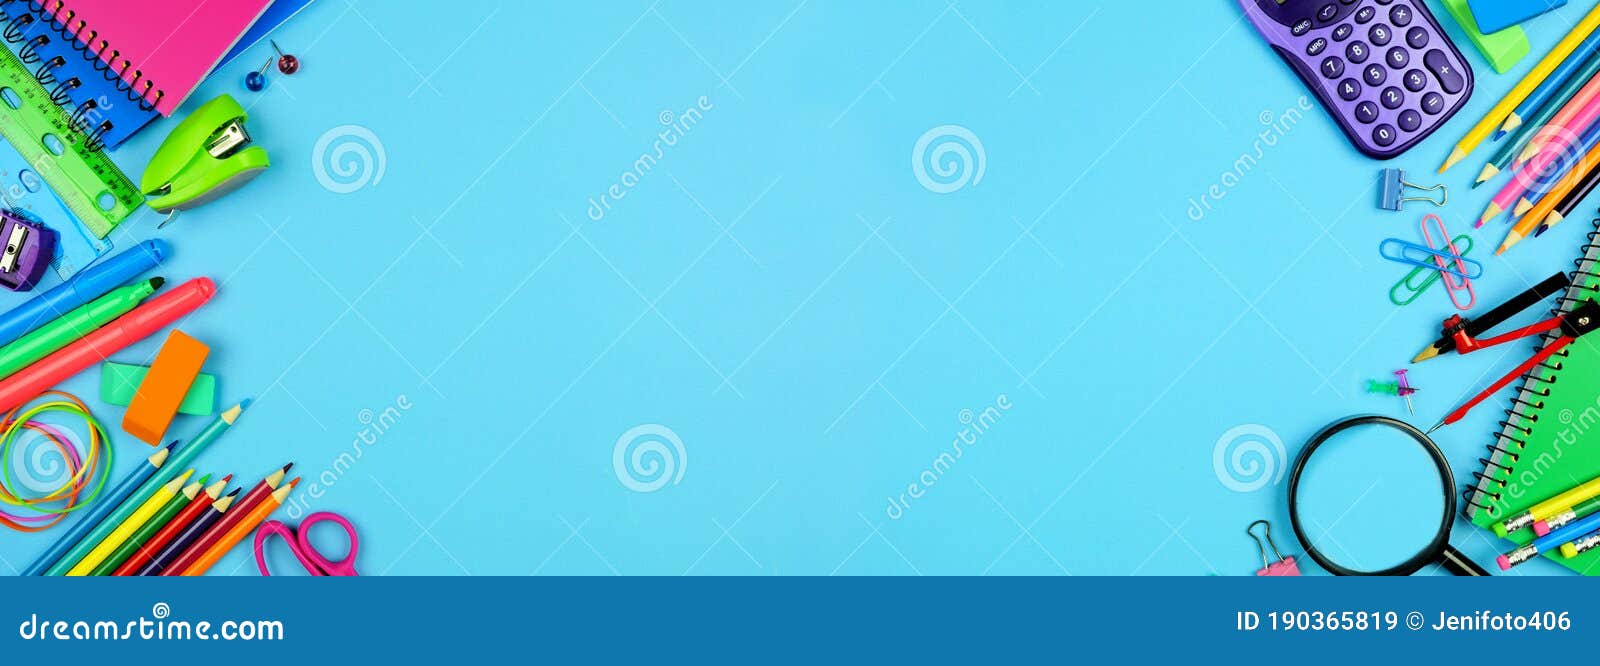 School Supplies Double Border Over a Blue Paper Banner Background with Copy  Space Stock Image - Image of border, learning: 190365819